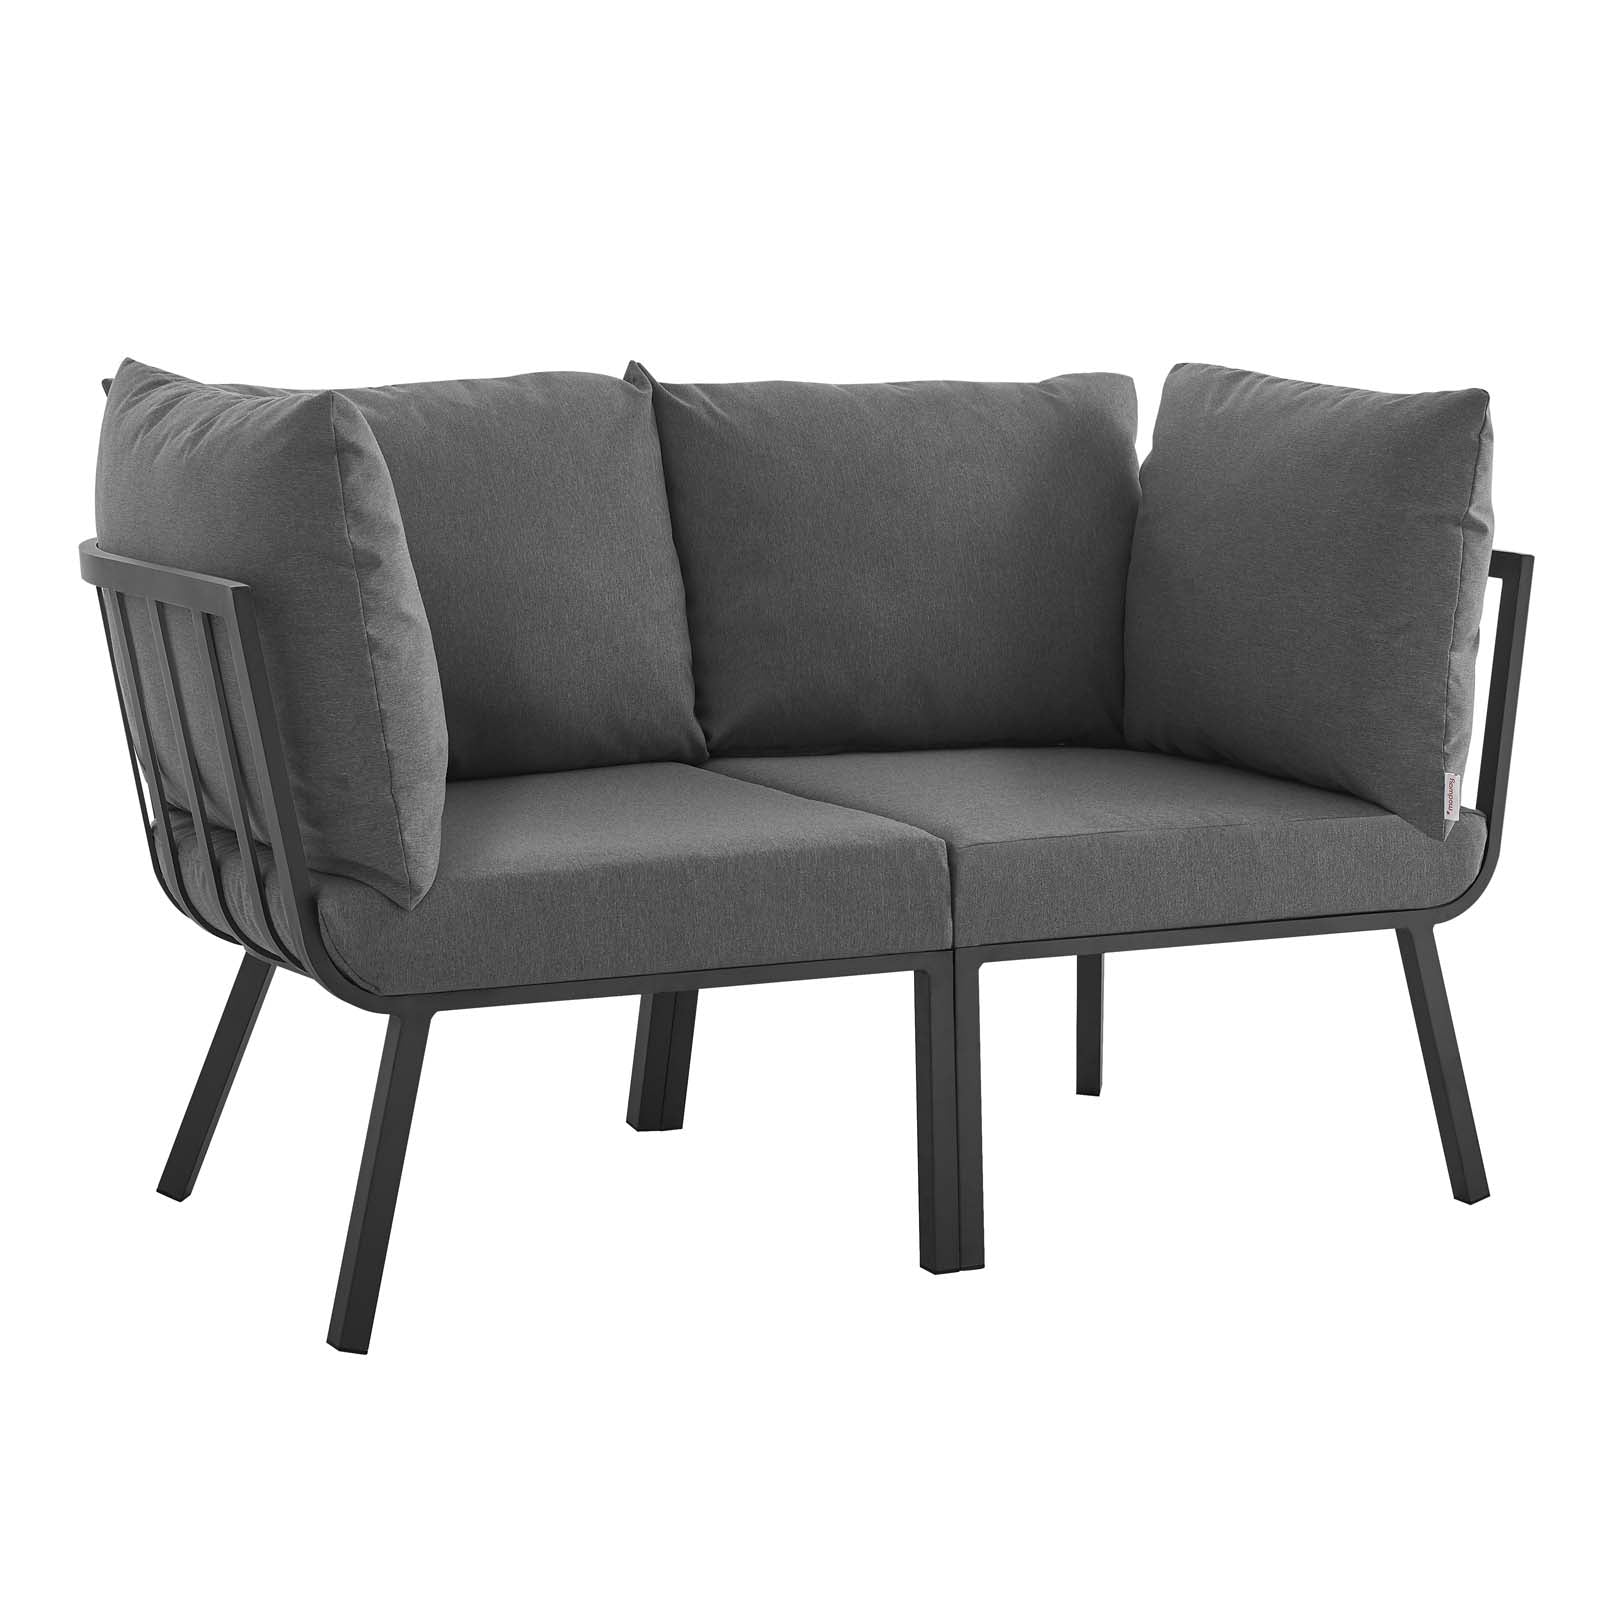 Modway Outdoor Chairs - Riverside 2 Piece Outdoor Patio Aluminum Sectional Sofa Set Gray Charcoal